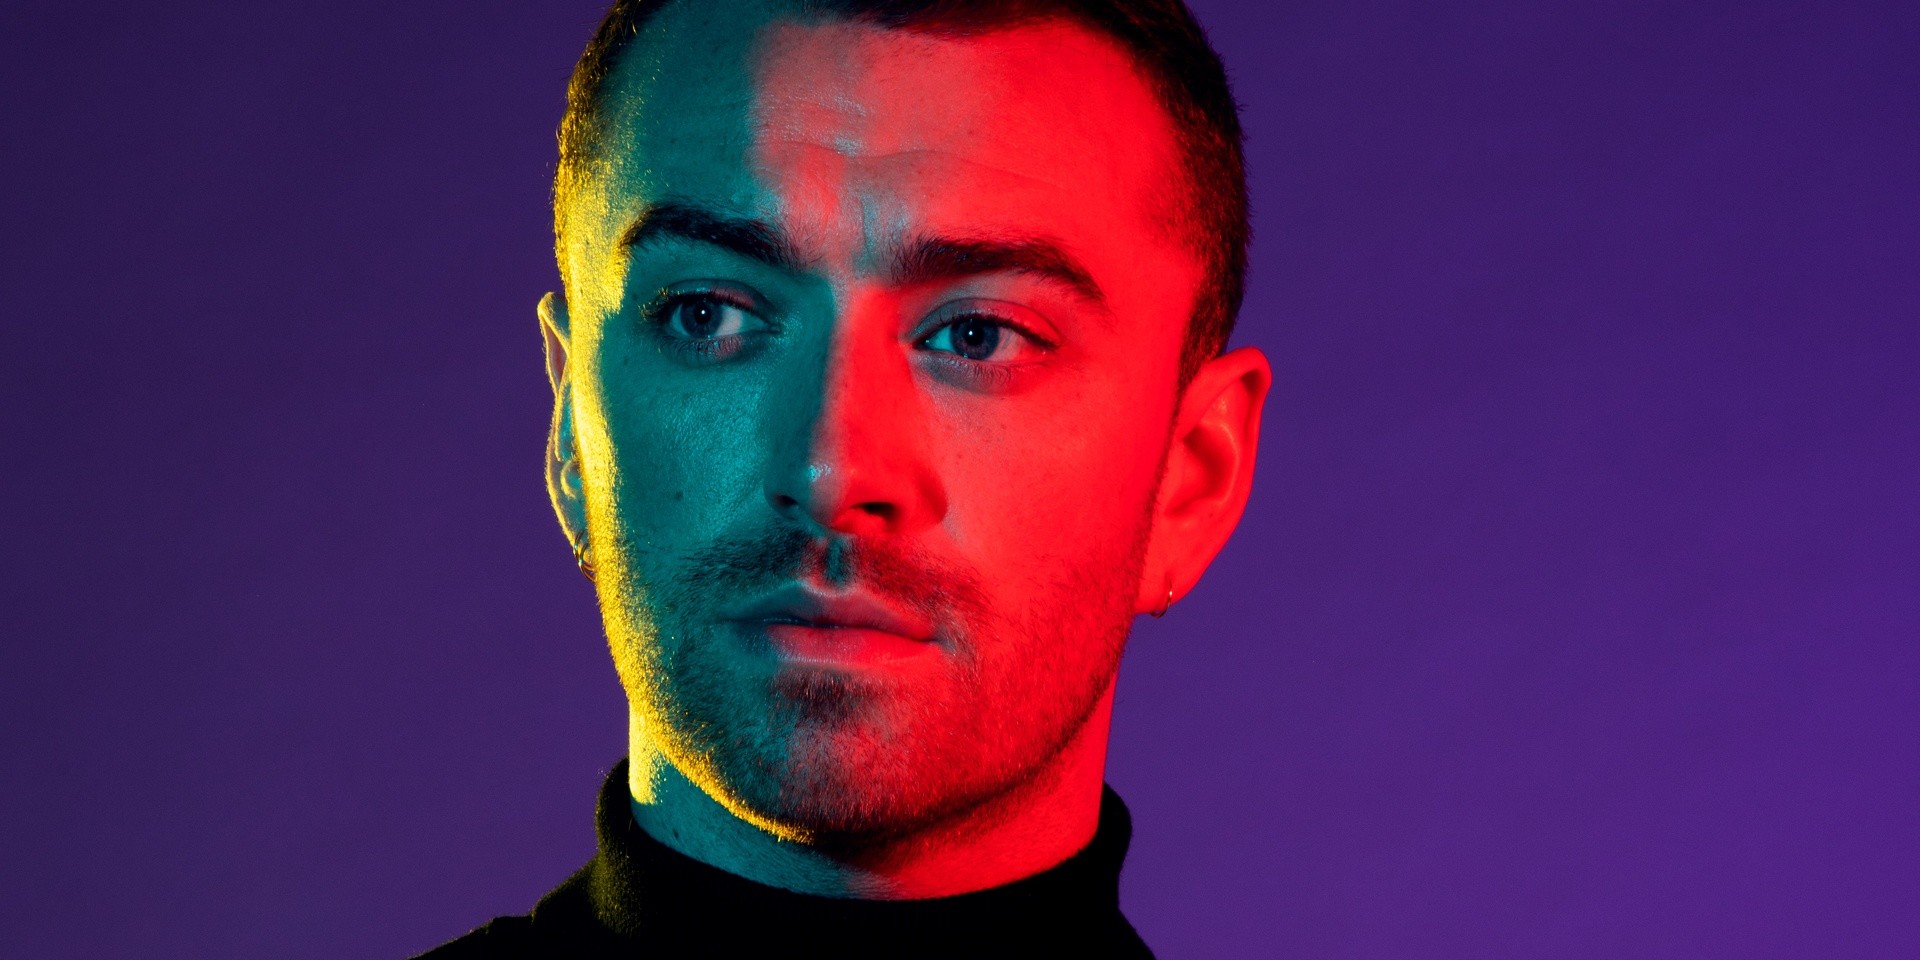 Sam Smith announces upcoming studio album in 2020 featuring a full-blown pop production